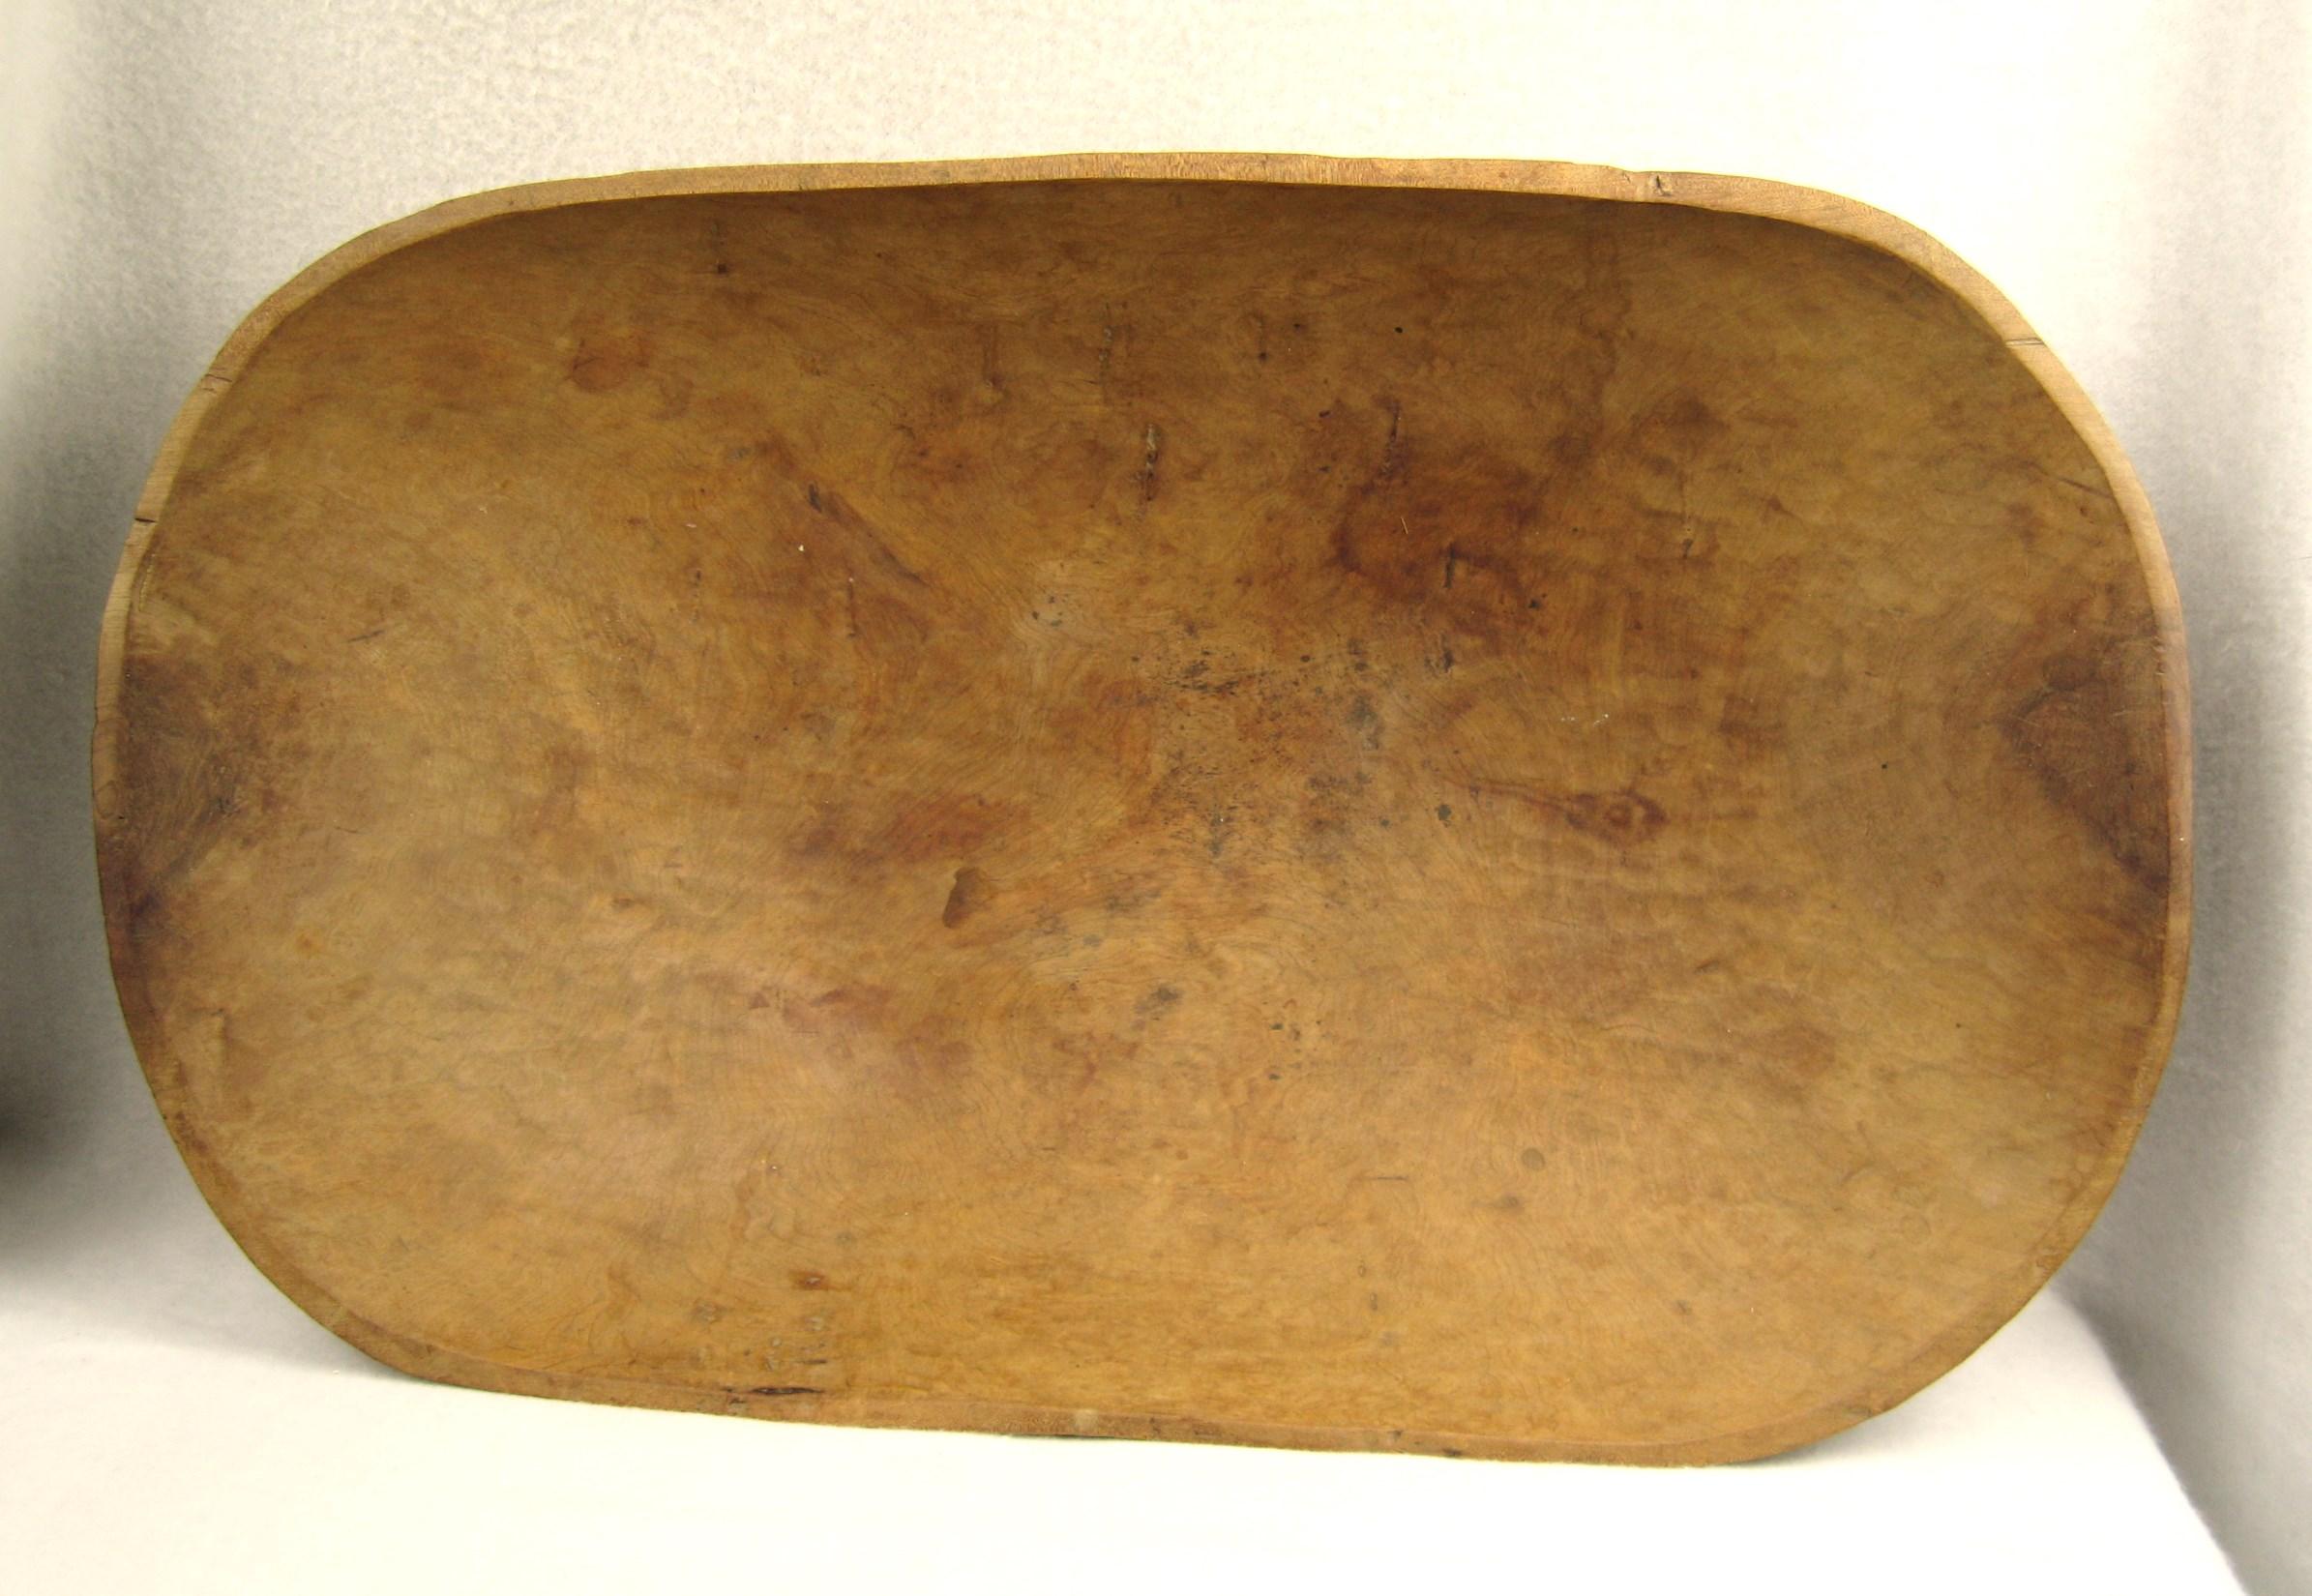 This is a wonderful American 19th-century primitive cherry bowl or trencher, hand carved very thin 1/4